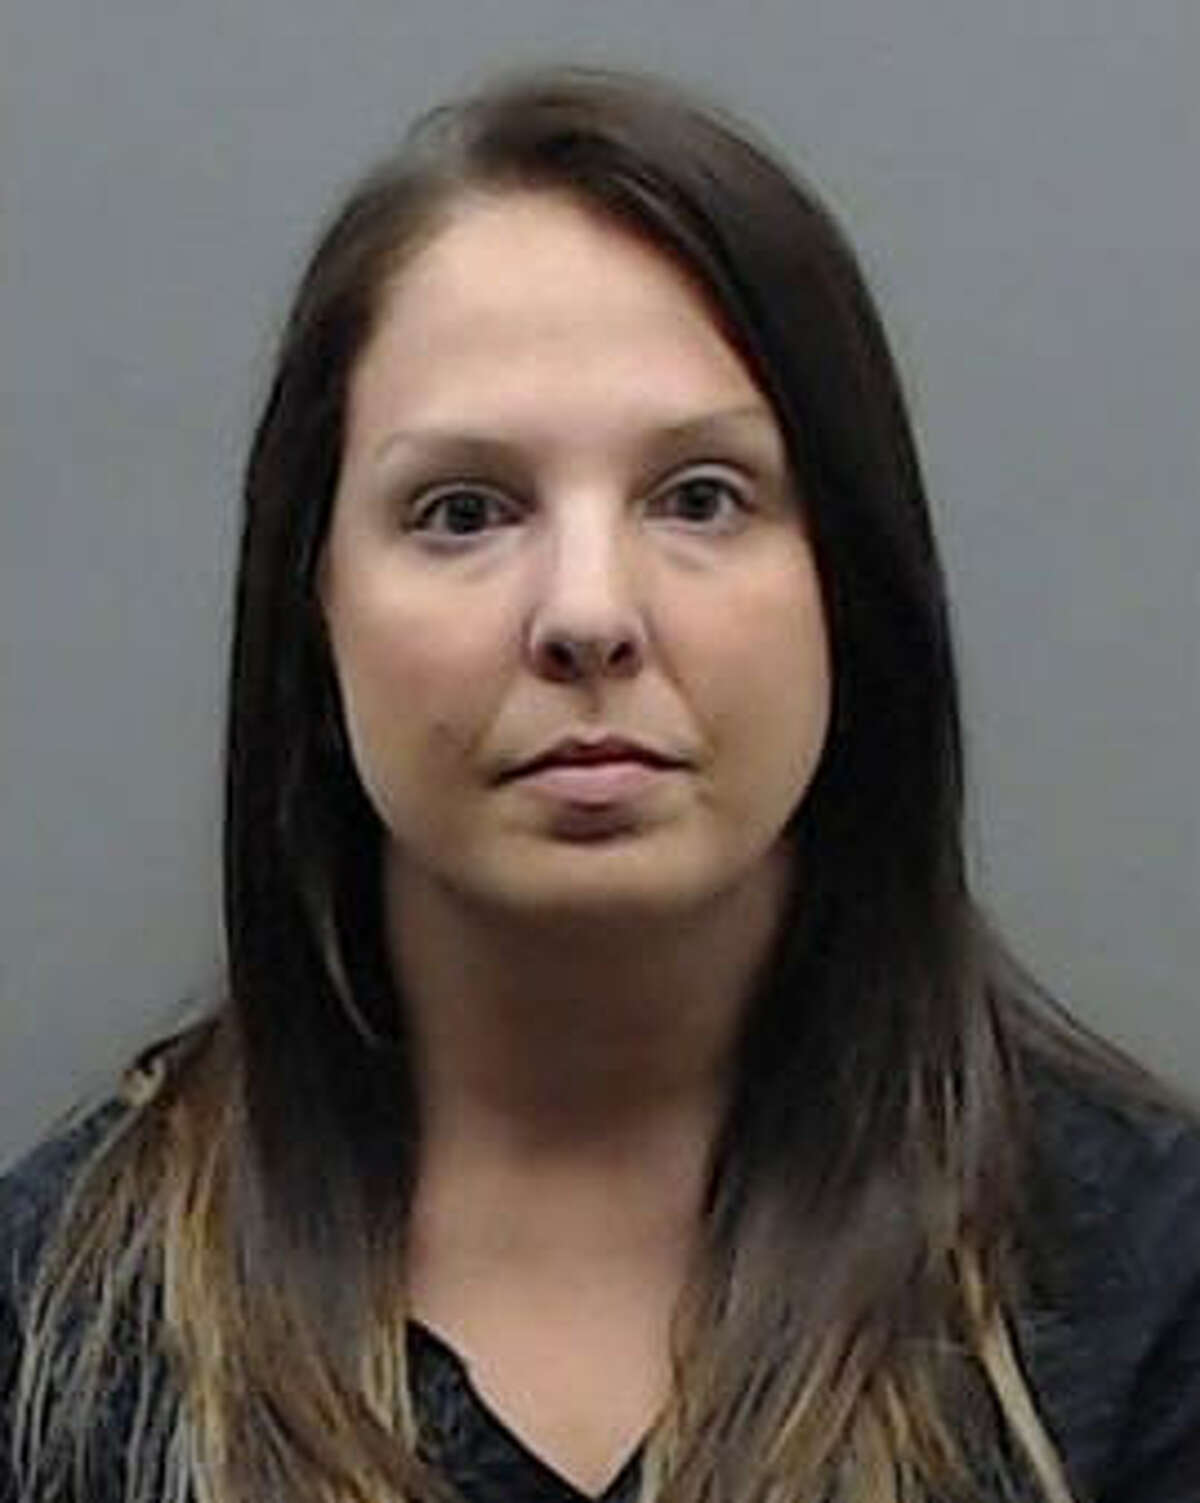 Barbara Lynn Orpineada, 31, an Arp Elementary school counselor, has been arrested after being accused of having an improper relationship with a student. See Houston-area teachers who have been tied to teacher-student sex scandals up ahead. 